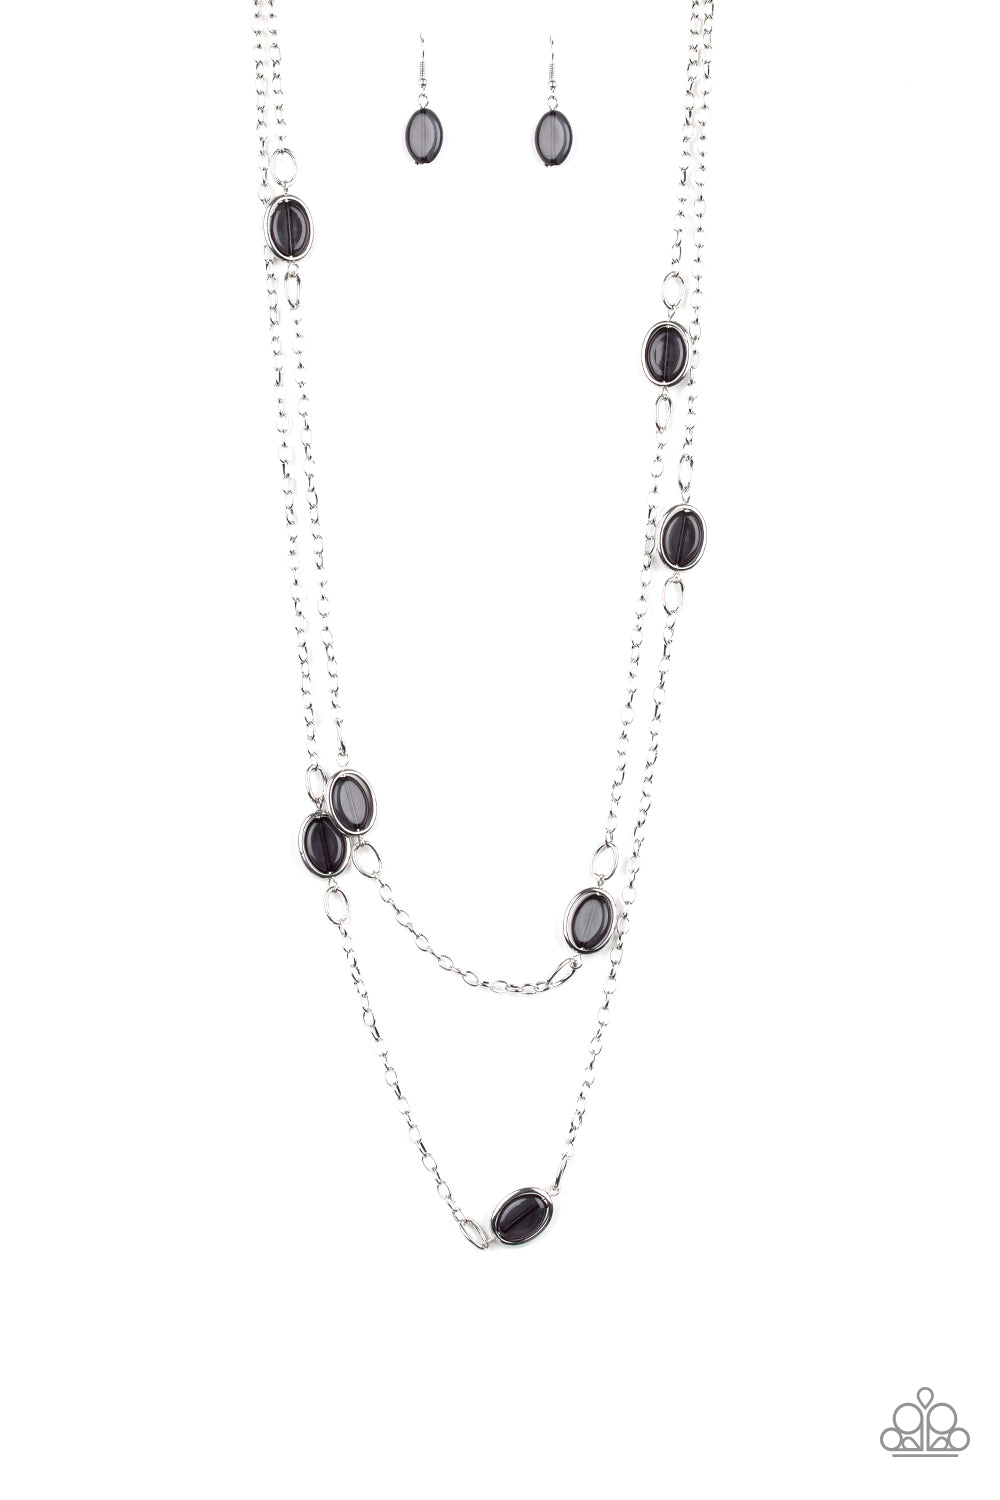 Glassy black beads are threaded along metallic rods, allowing them to spin inside their silver fittings. The colorful frames trickle along two shimmery chains across the chest for a refined layered look. Features an adjustable clasp closure.